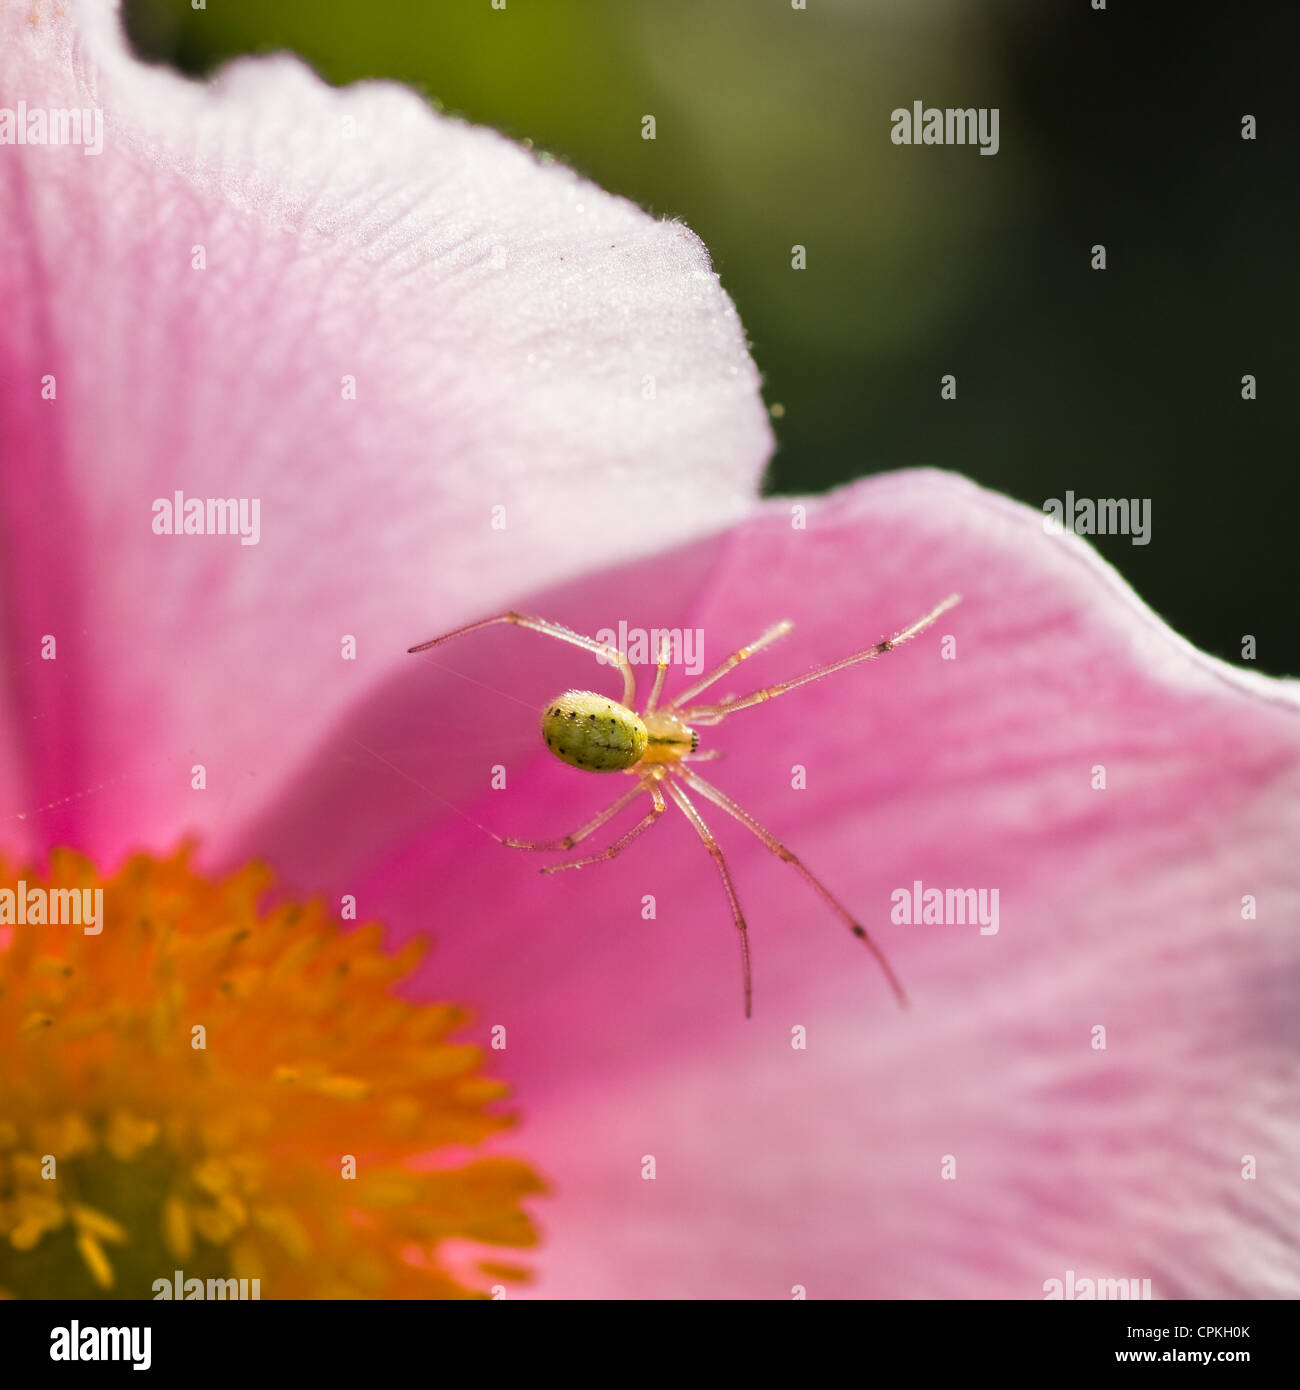 Small green spider hiding on Japanese anemone flower in summer Stock Photo